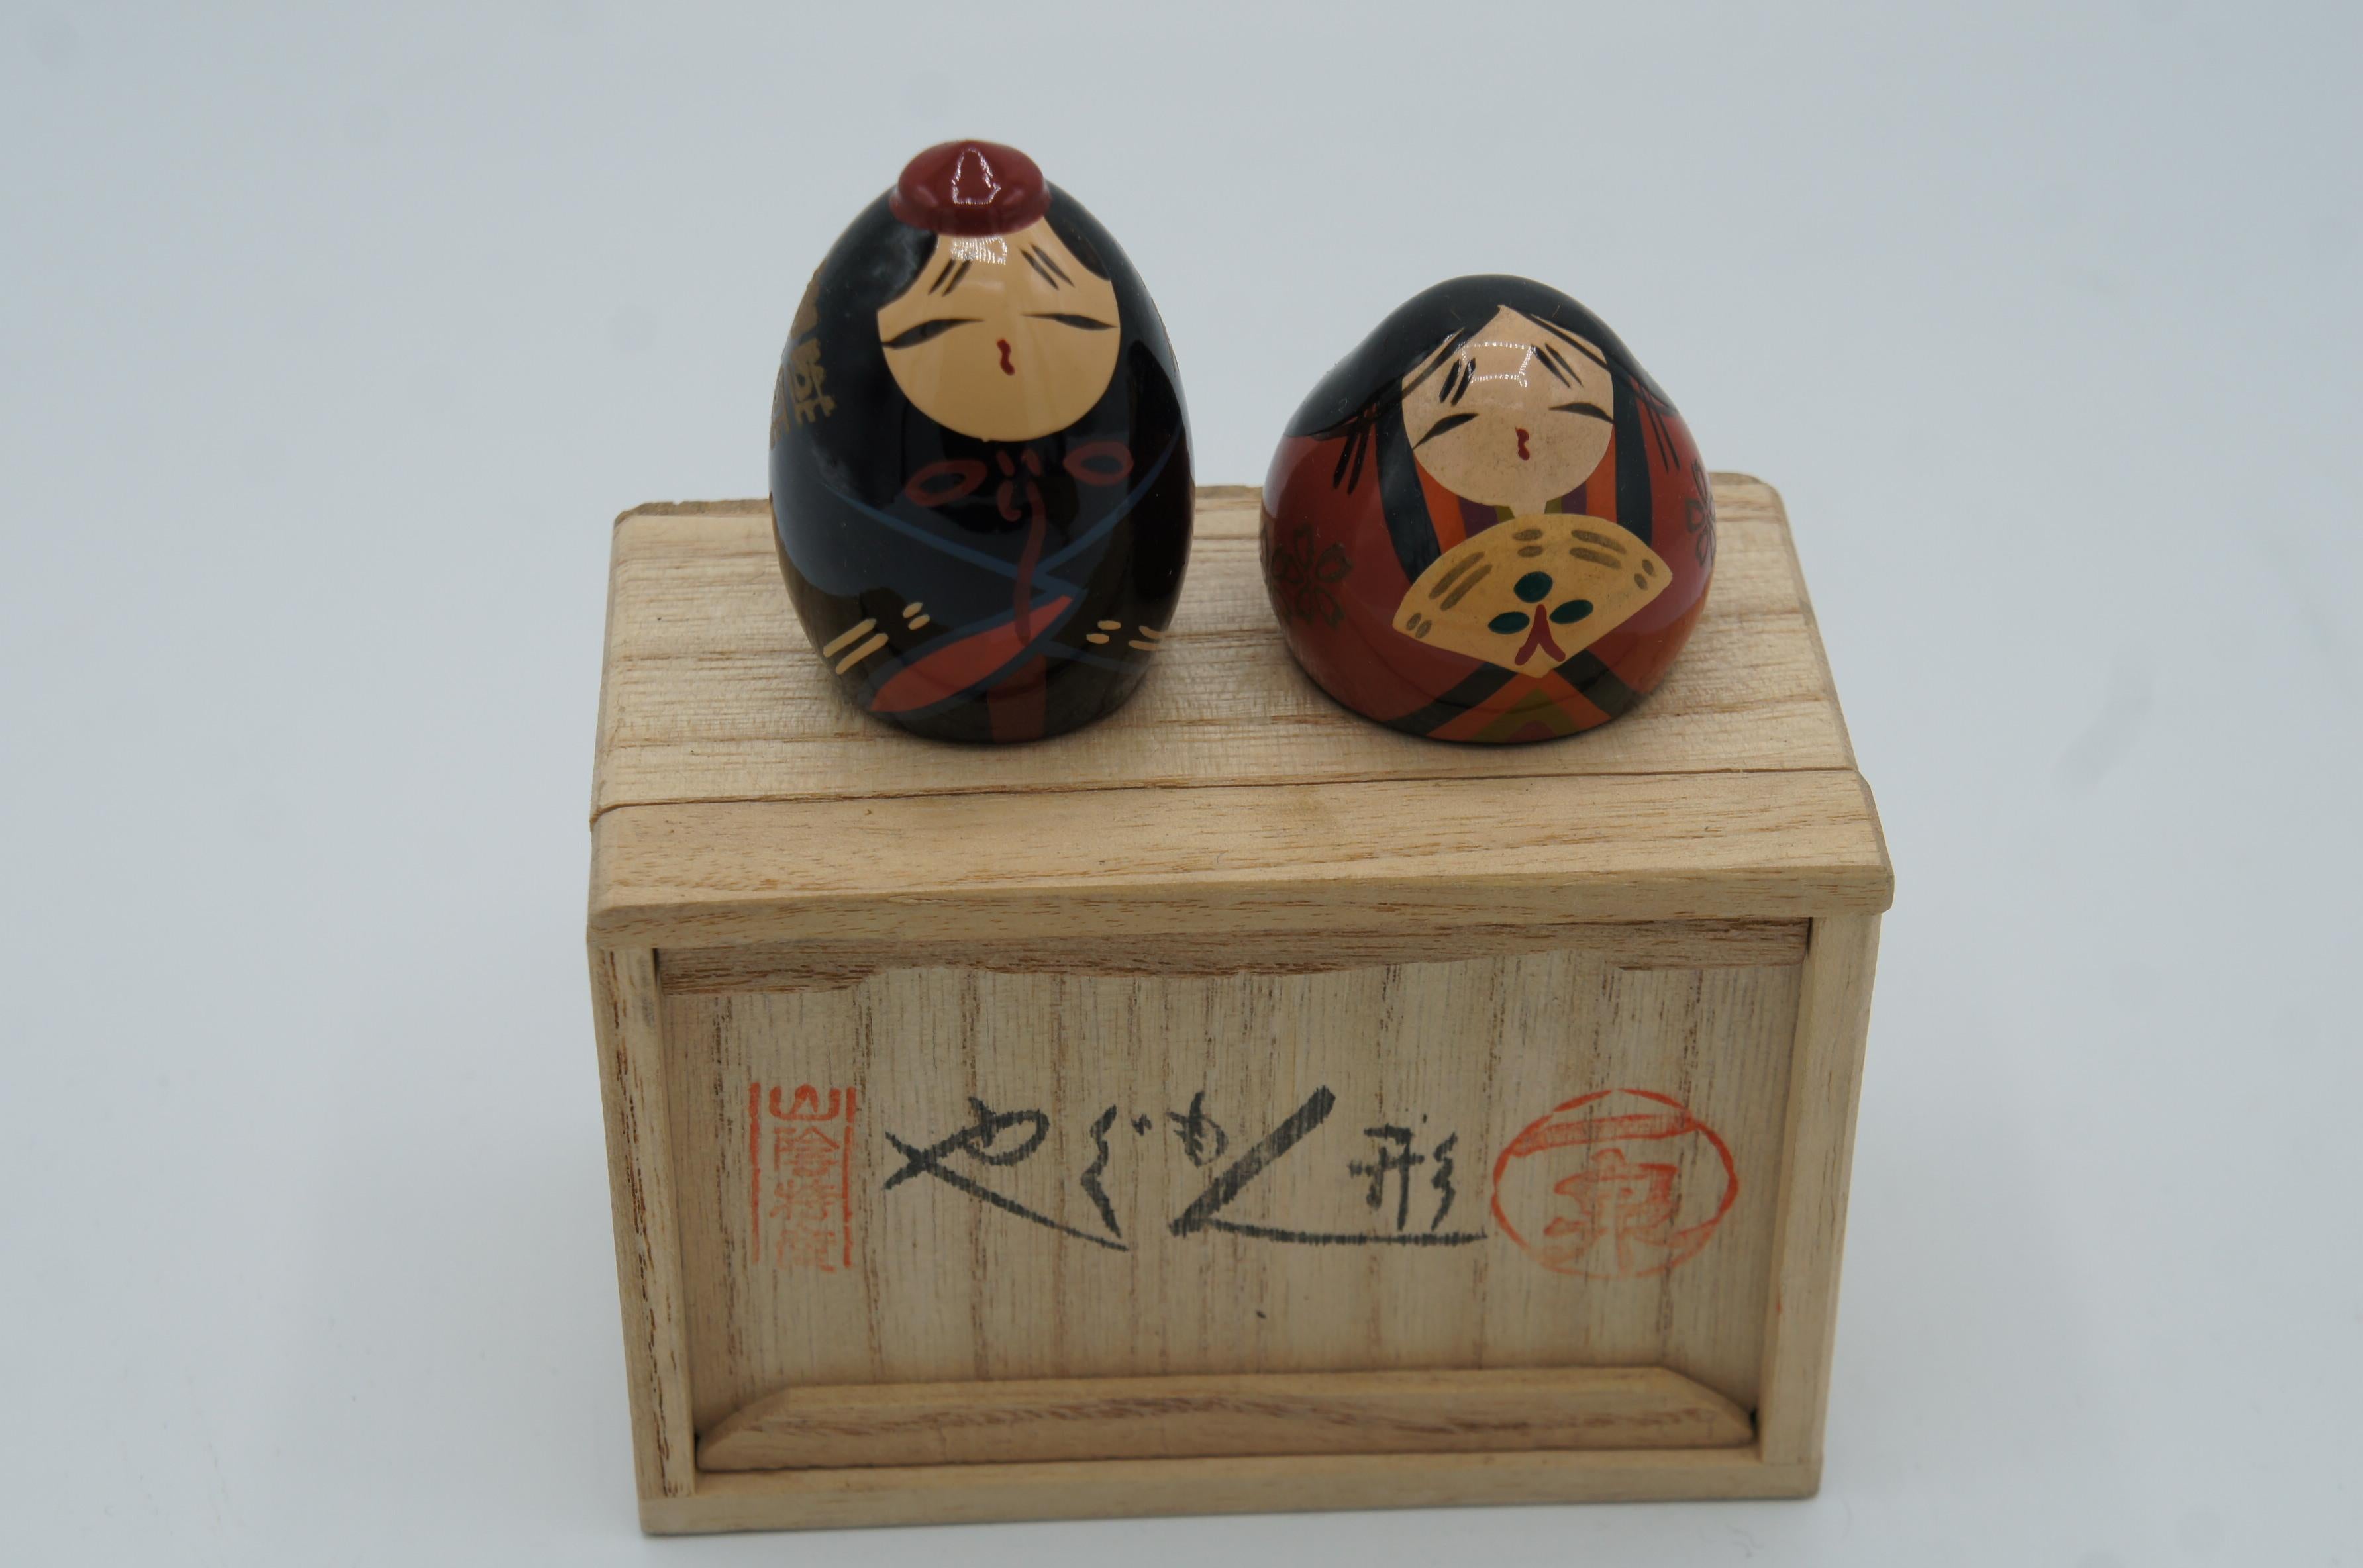 -Details-
Era: Showa (around 1970)
Sold with box and the 2 pieces

Originally intended as toys for little girls, they were later sold as souvenirs, and today symbolize fertility and the desire to have a healthy child.